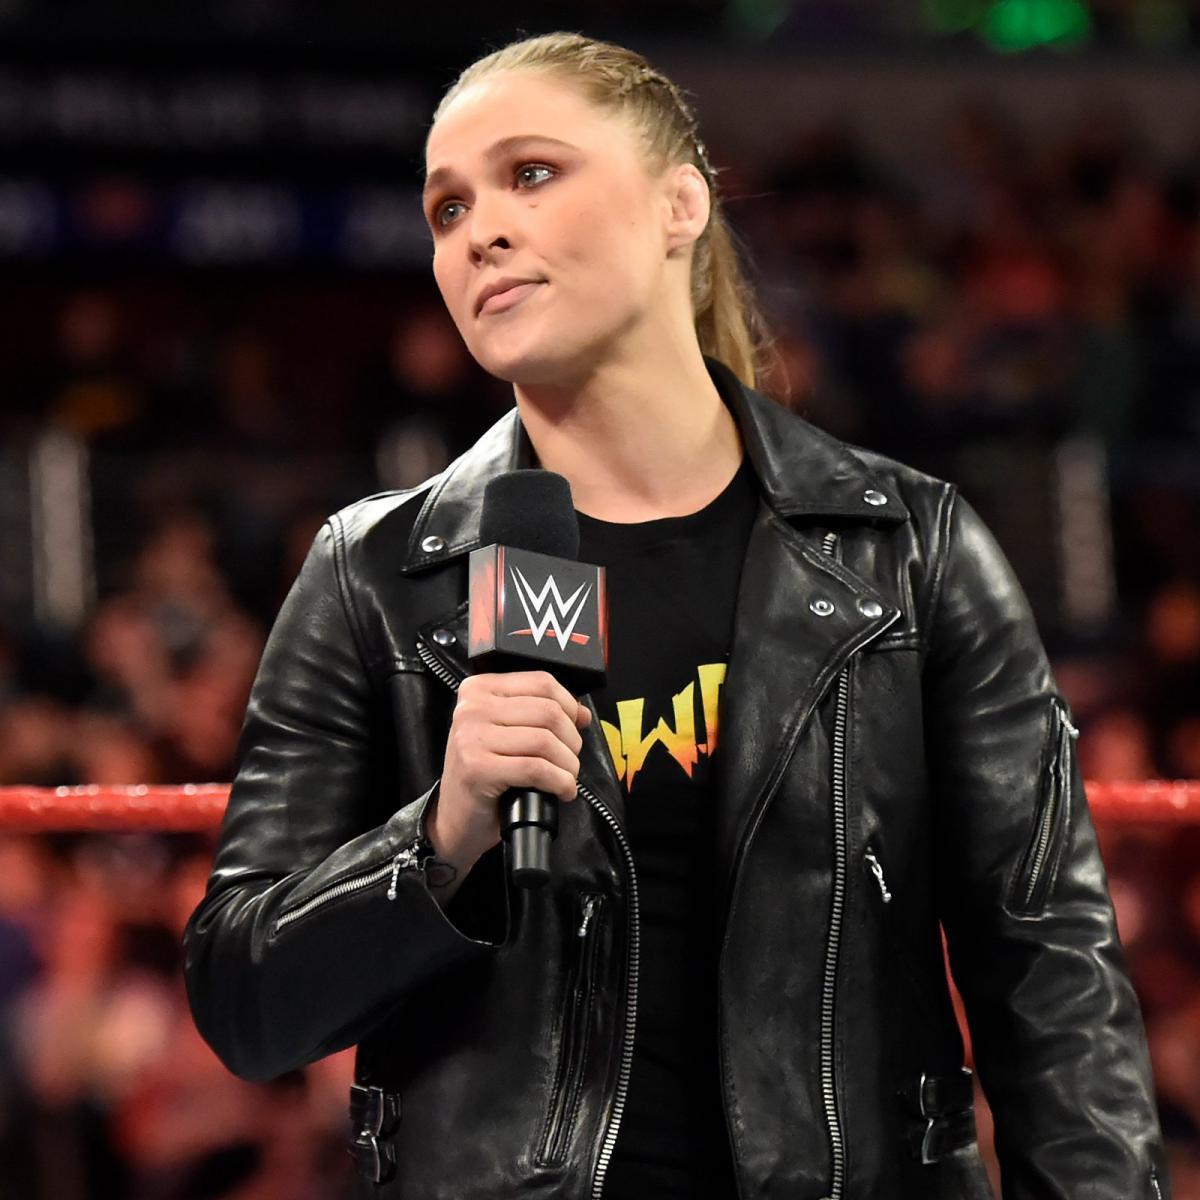 Ronda Rousey gets her WrestleMania match: photo